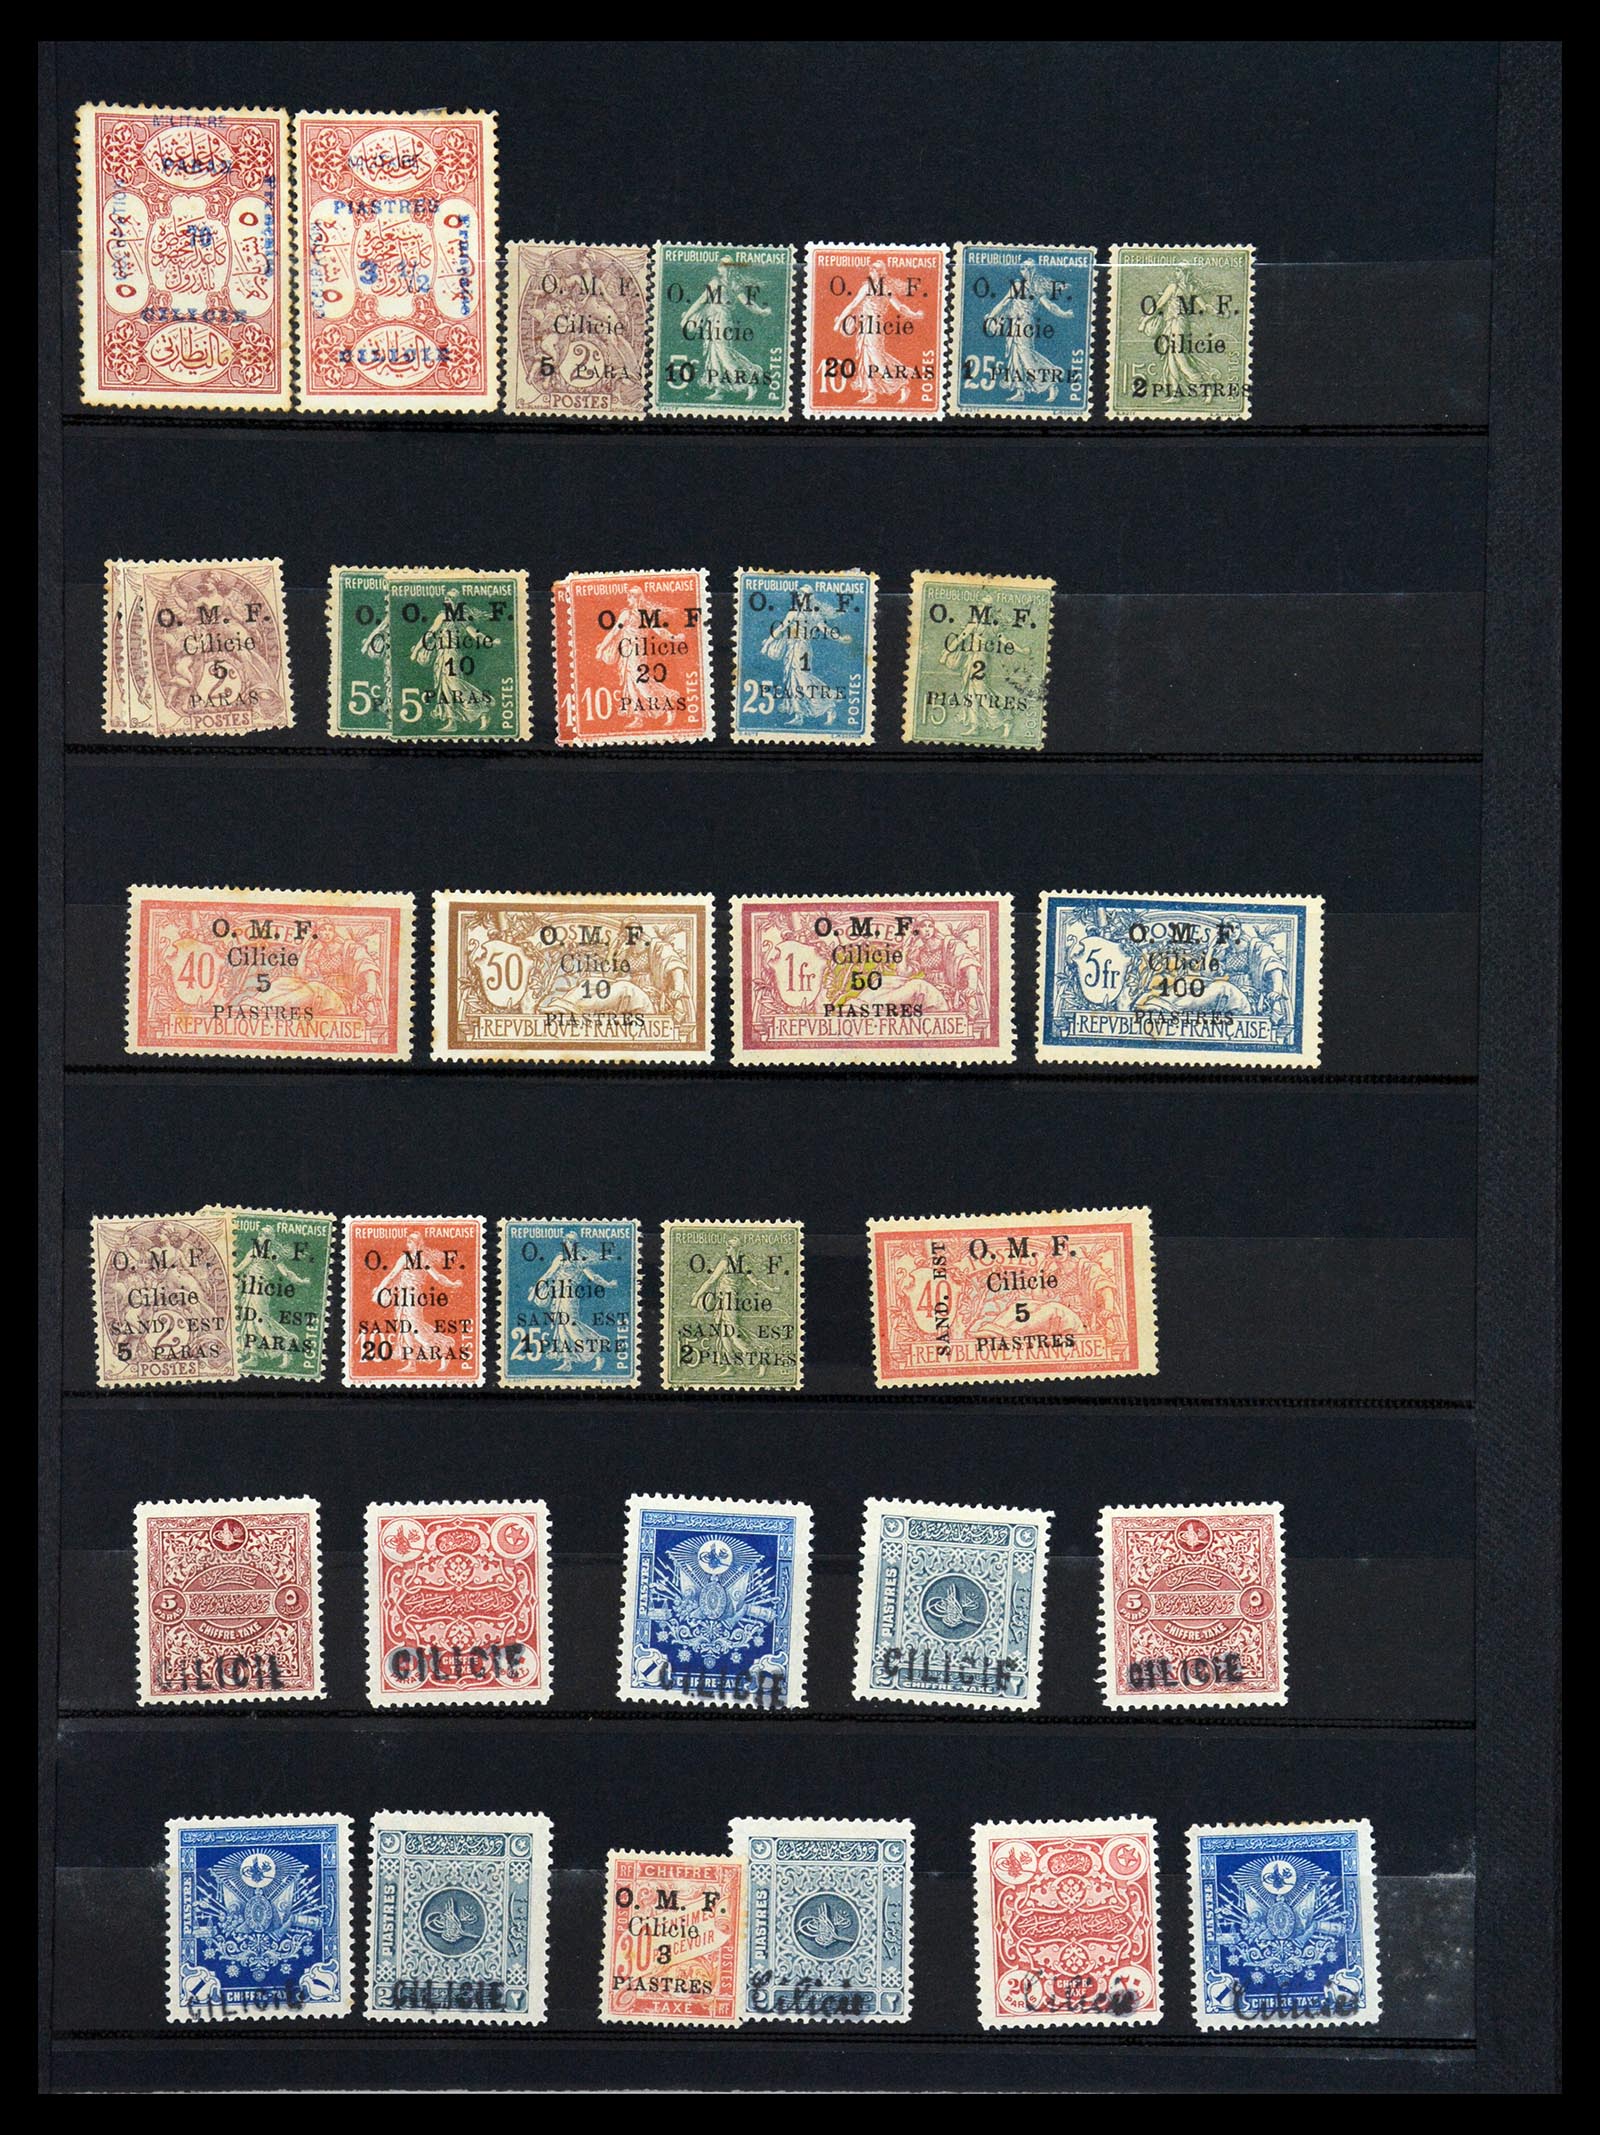 36605 010 - Stamp collection 36605 Frènch colonies 1880-1930.